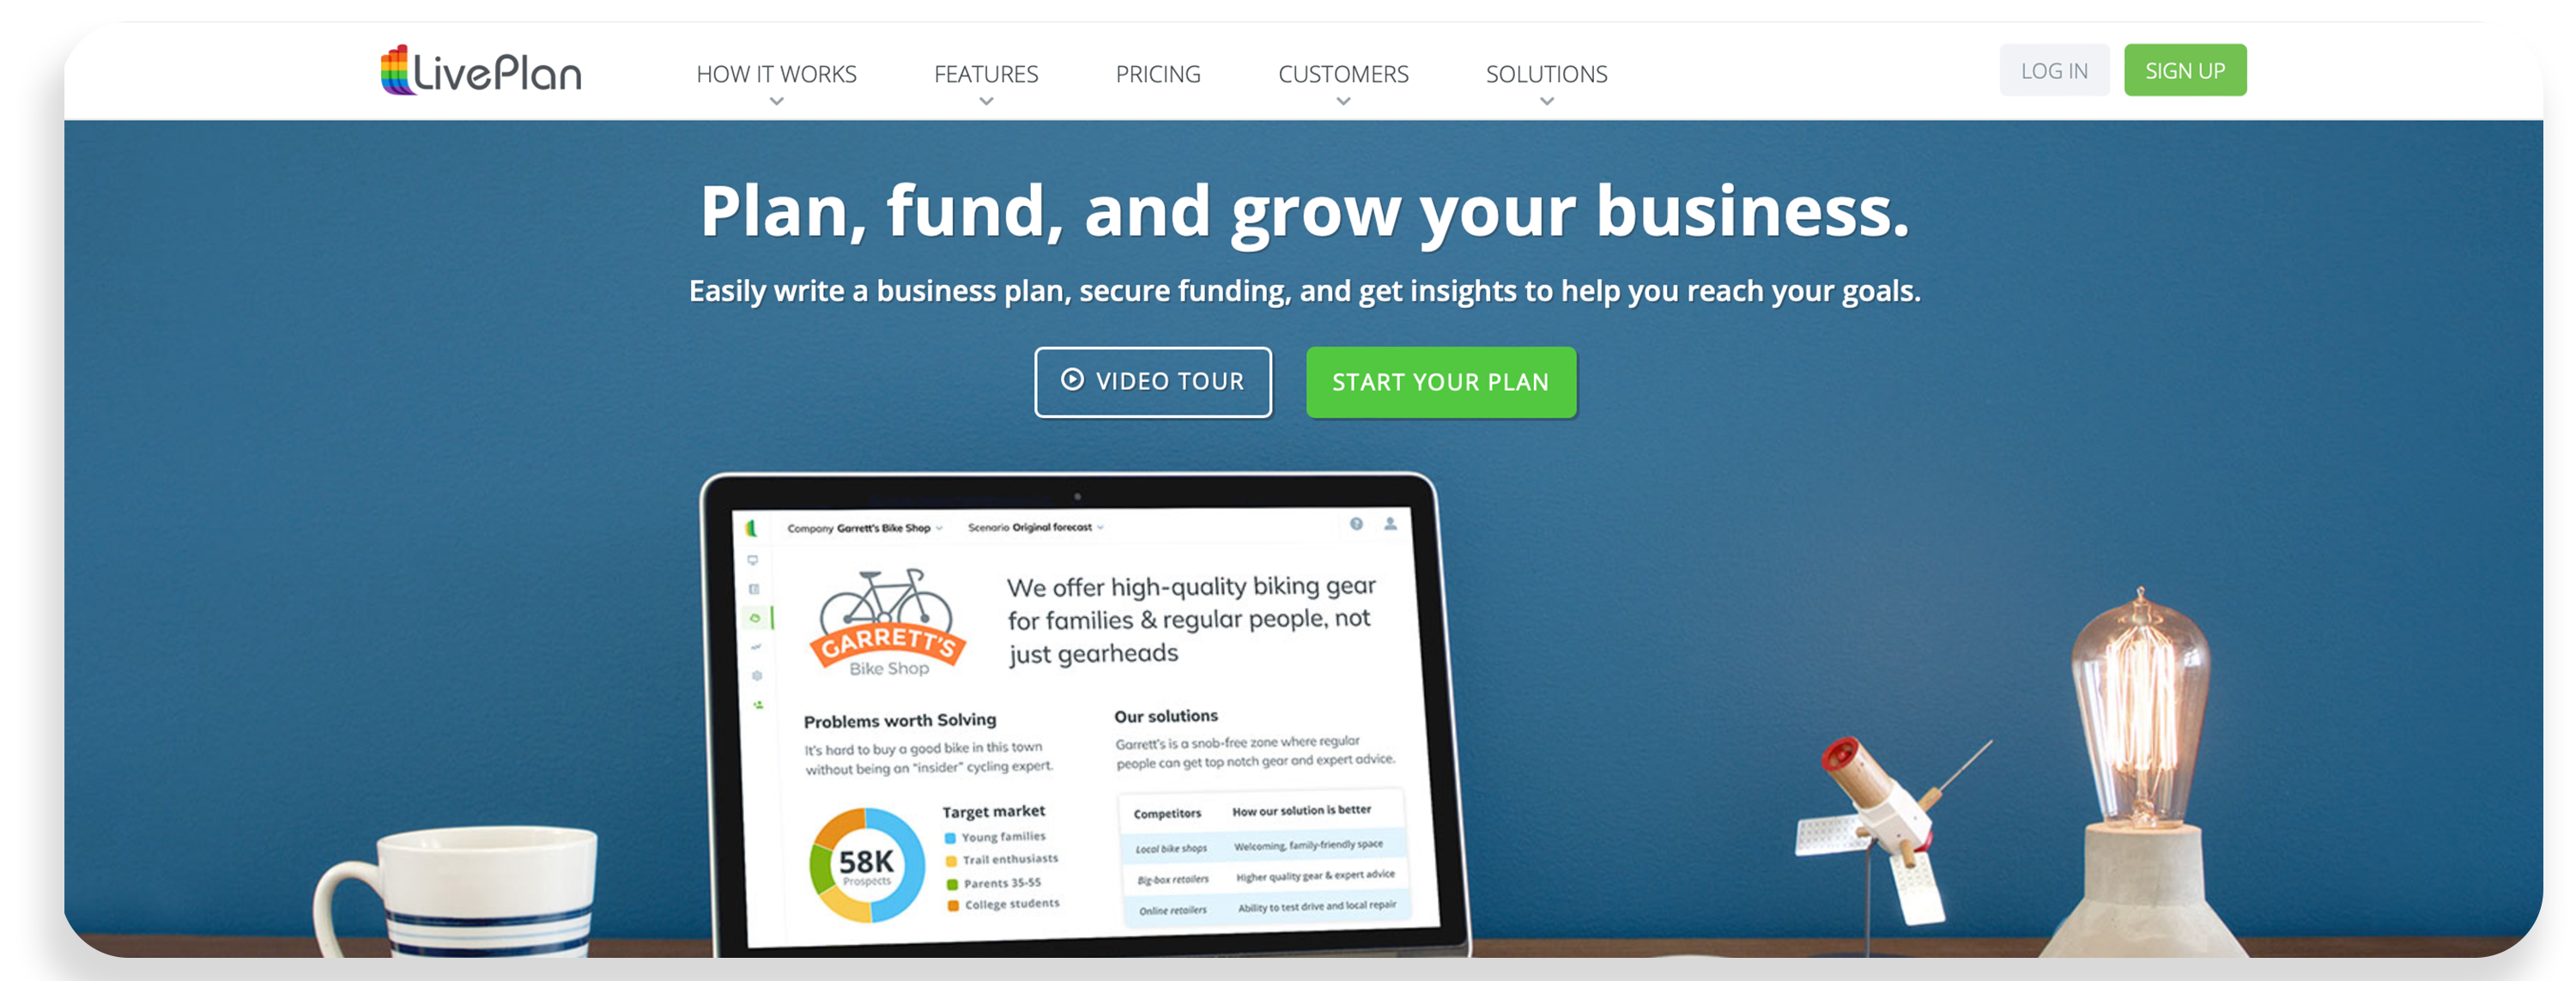 LivePlan - Small Business Budgeting Software